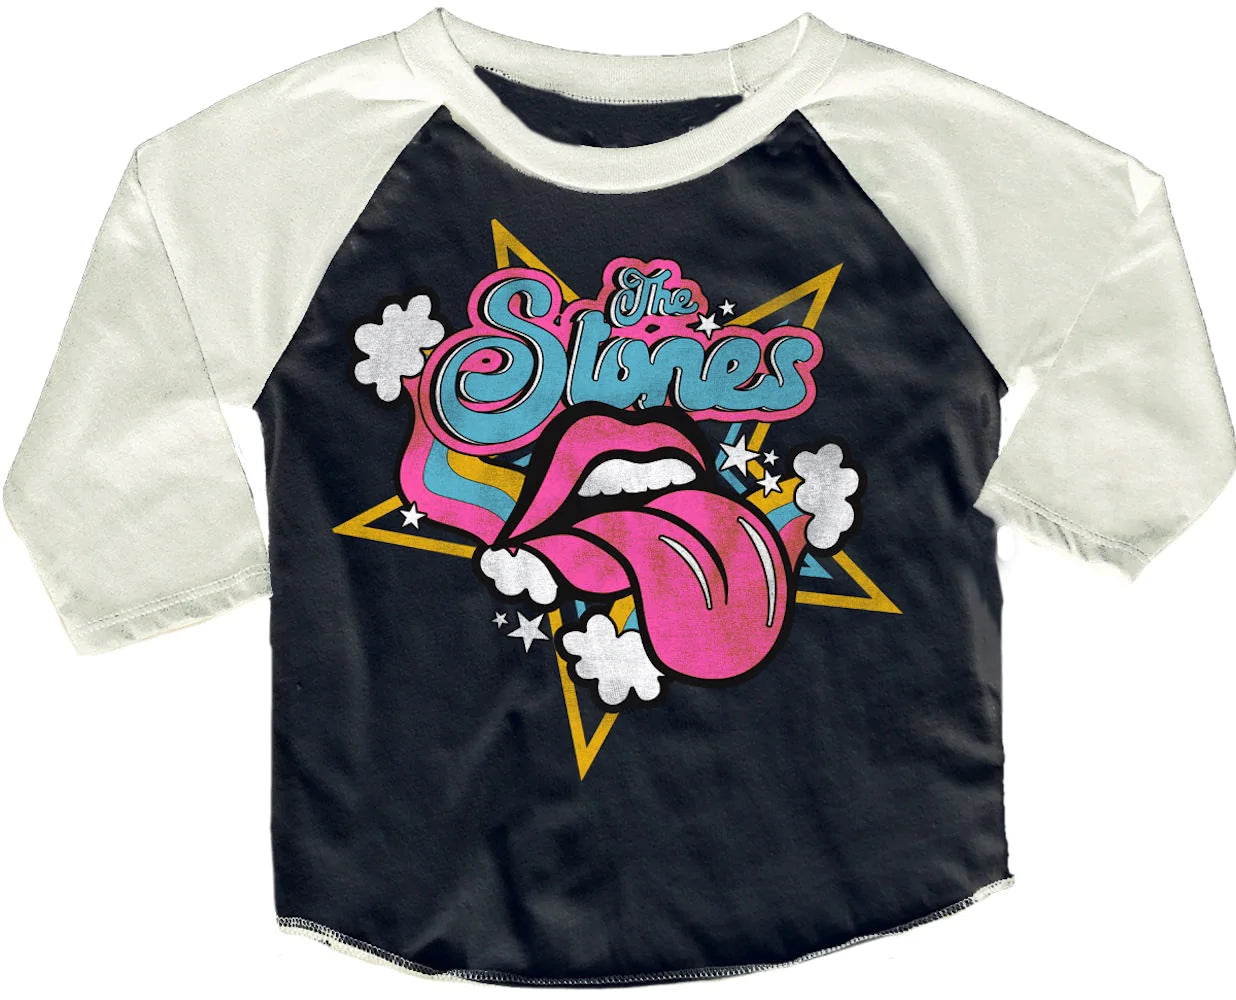 Rowdy Sprout - The Rolling Stones Raglan Tee